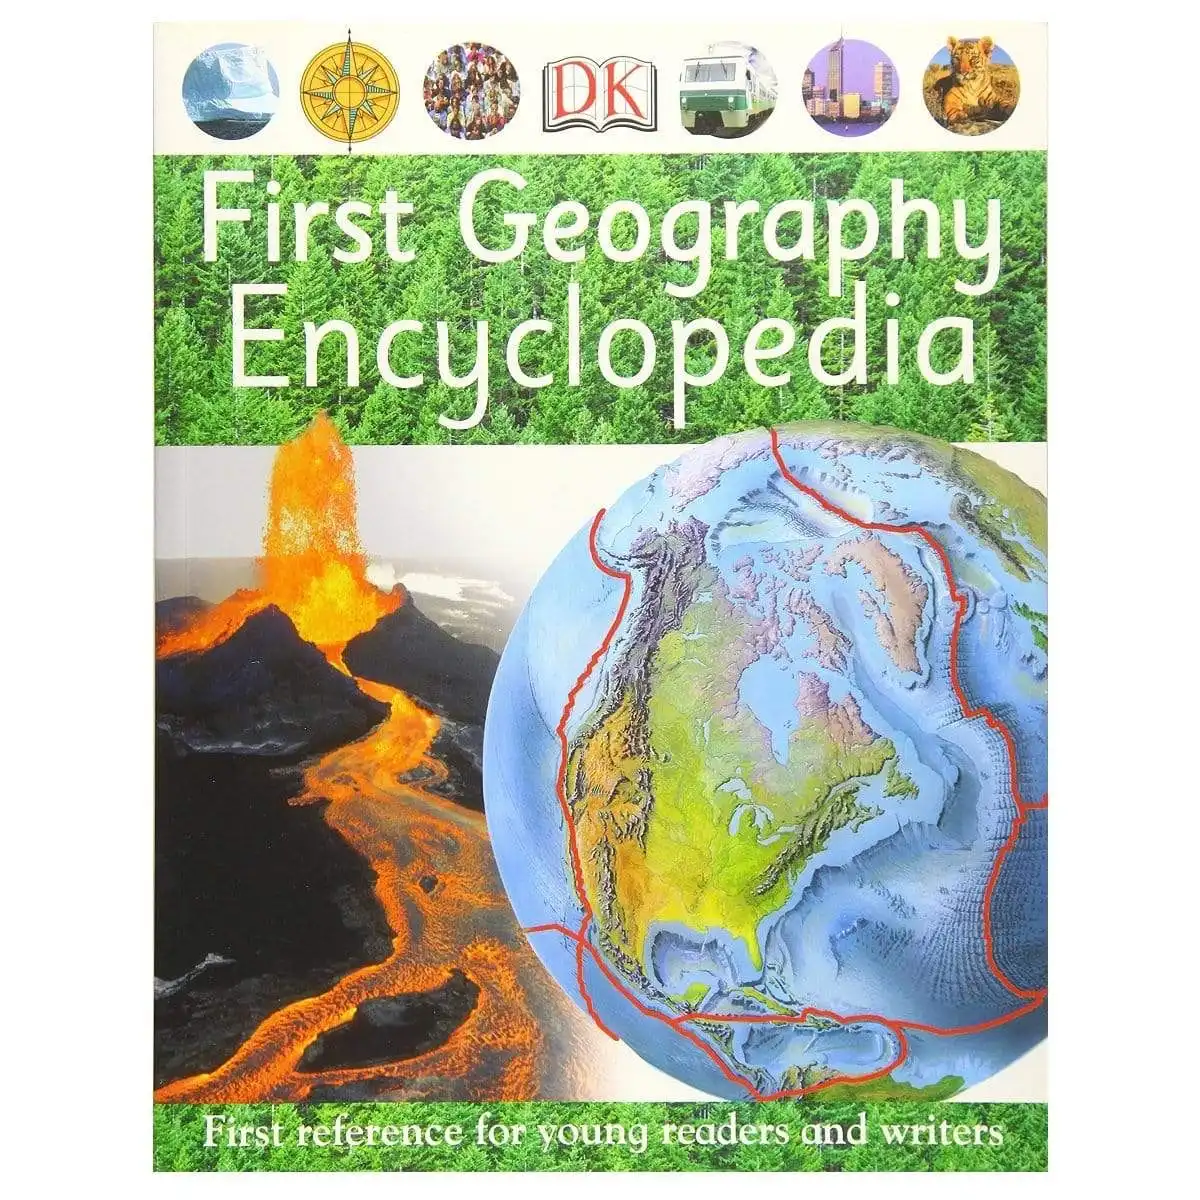 DK: First Geography Encyclopedia